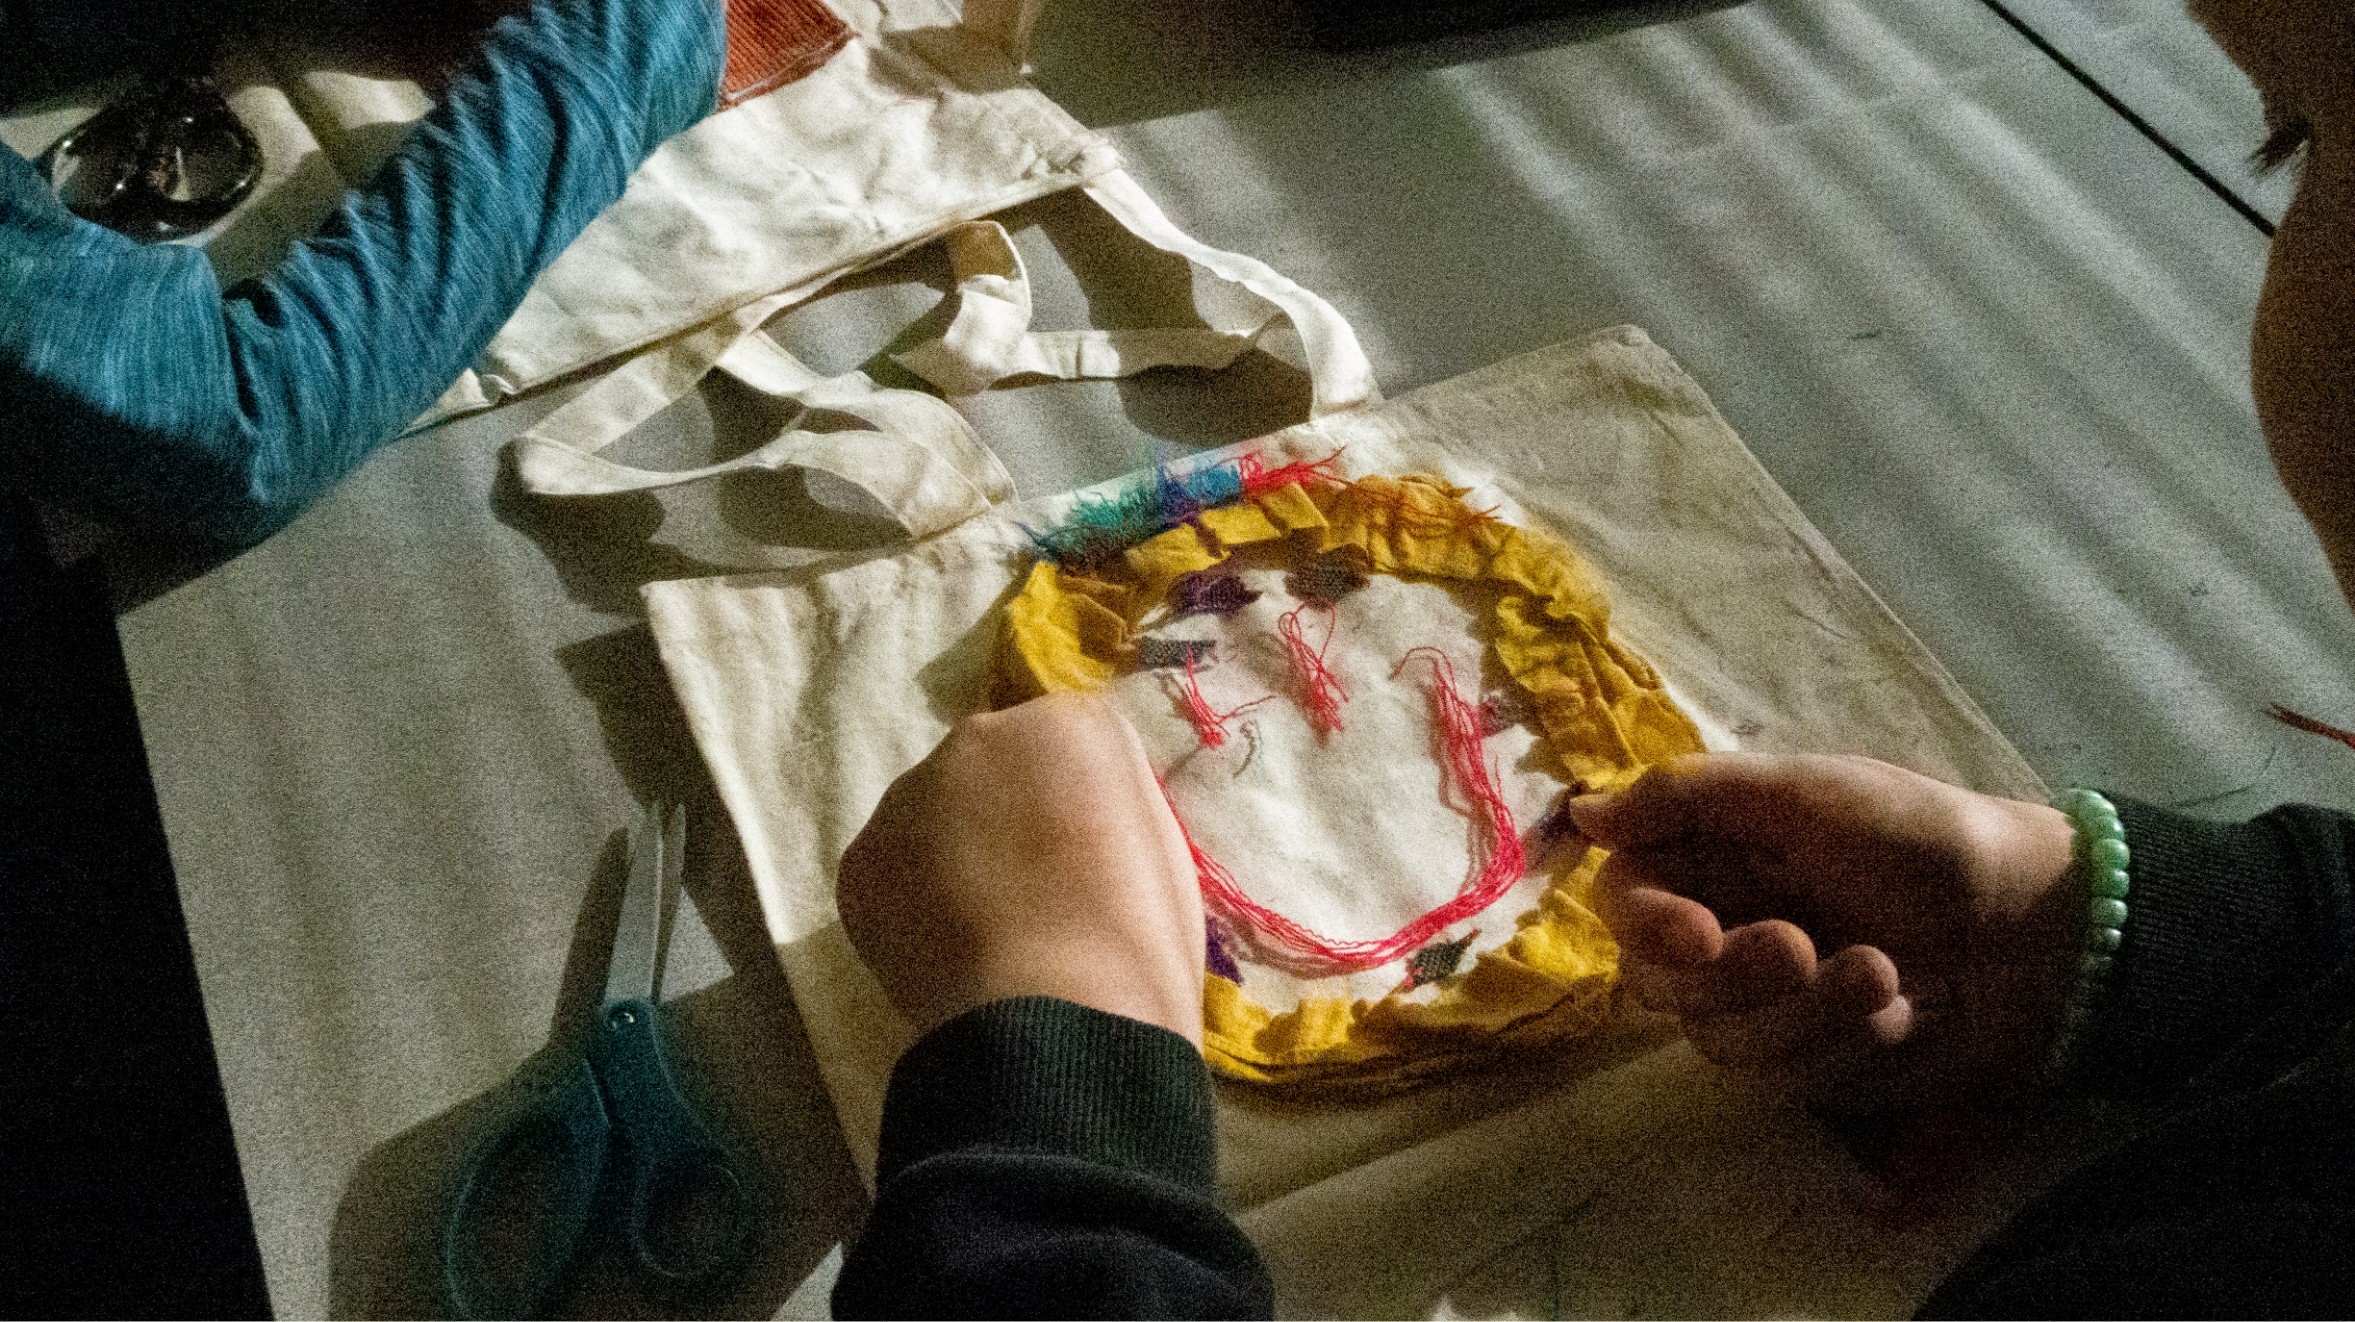 a young person lays out fabric in shape of smiley face on tote bag